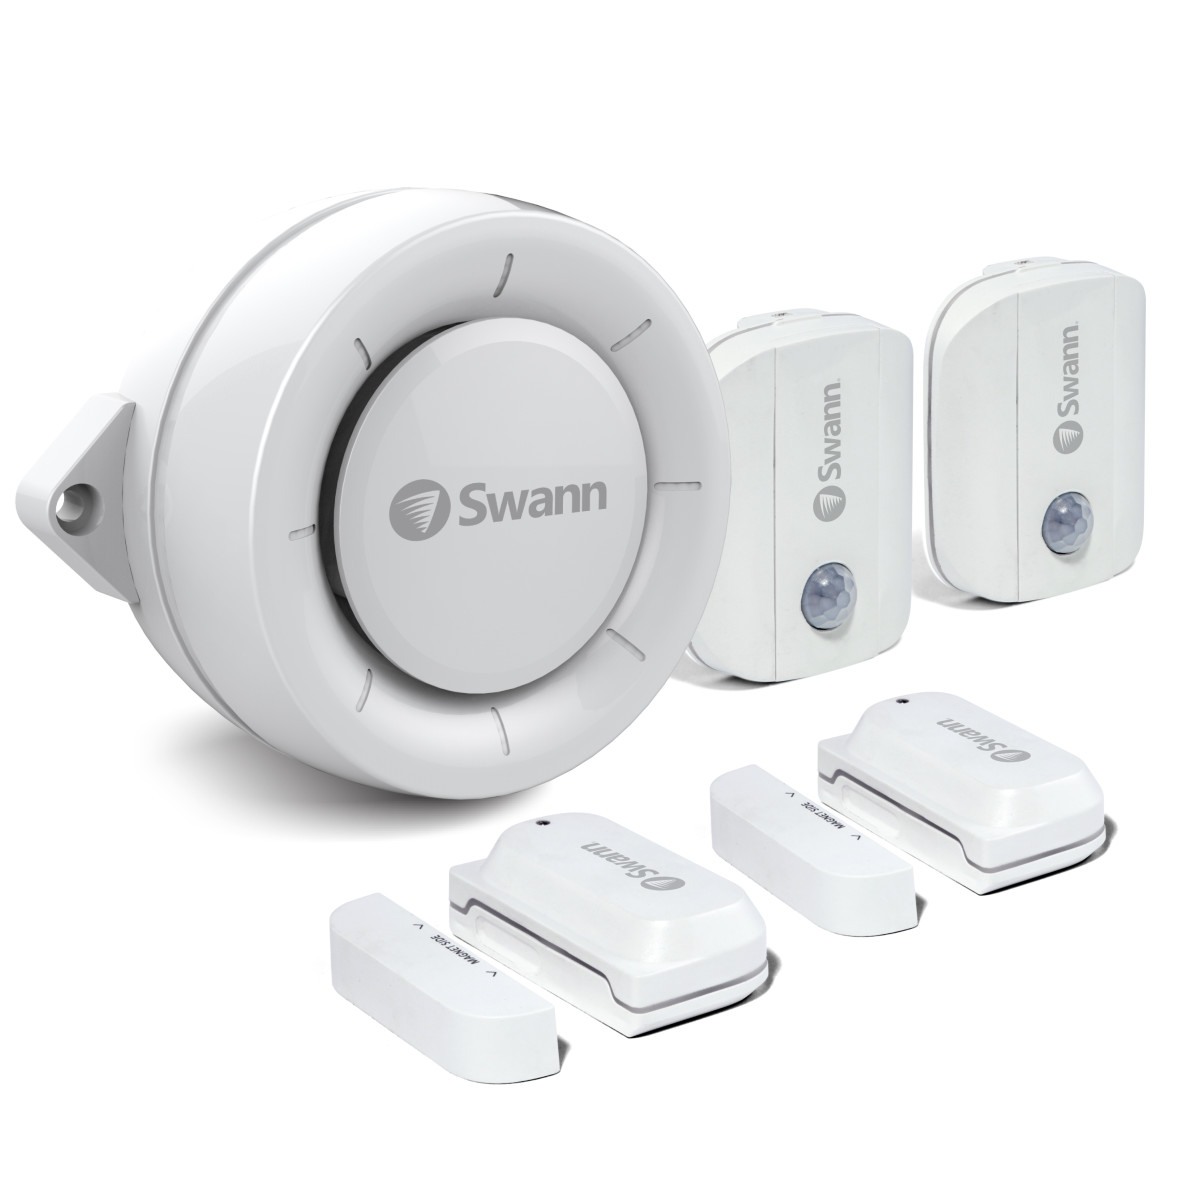 EUK - Smart Home Alarm Kit A